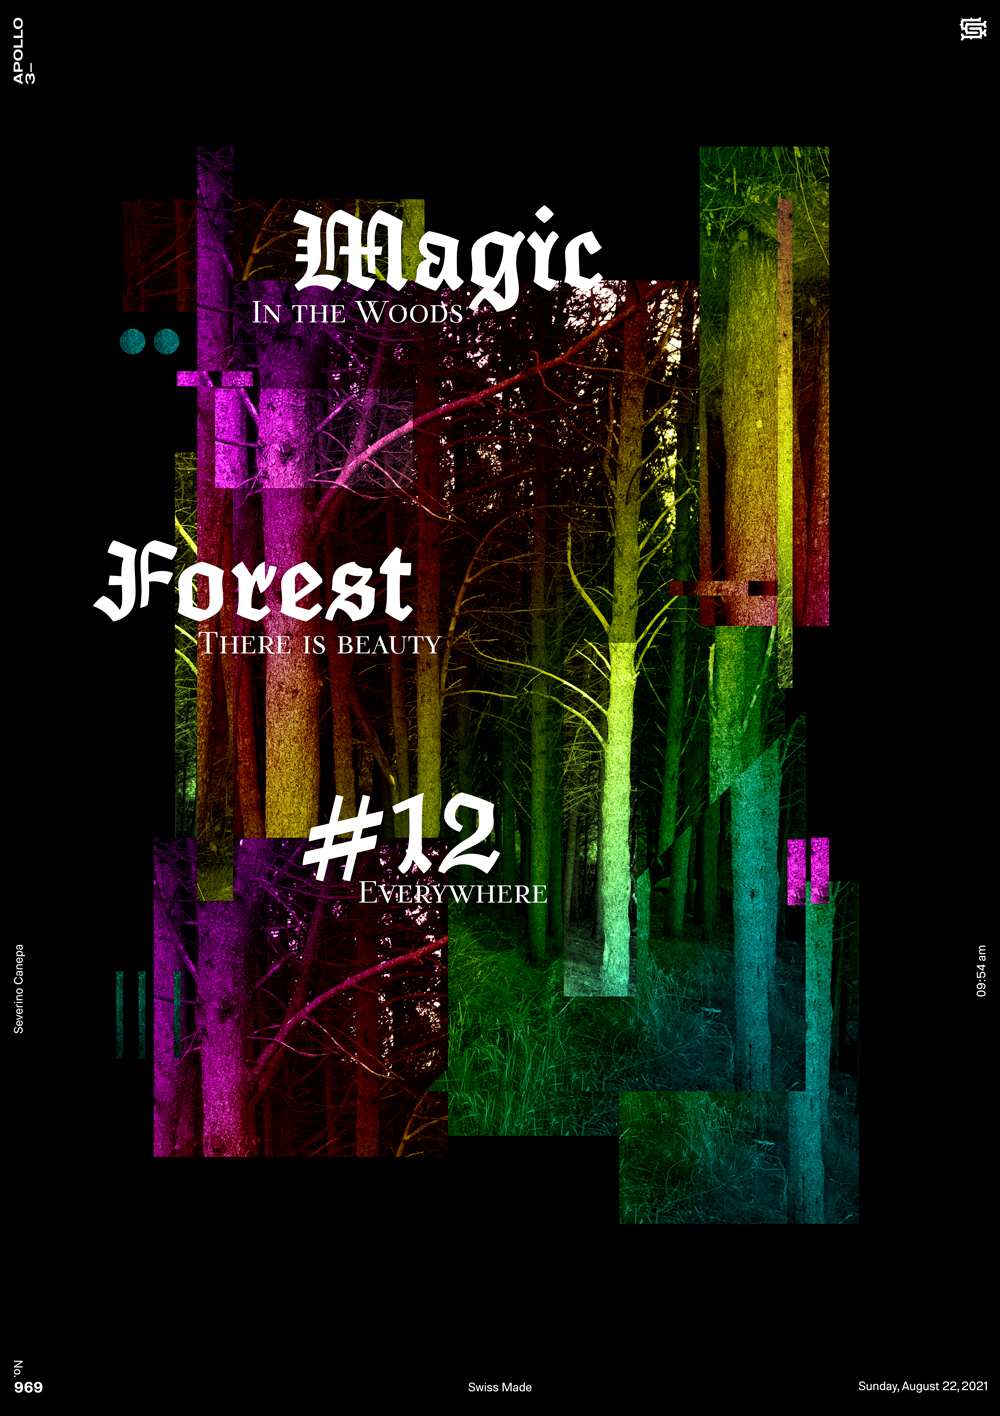 A new visual creation and variation of the mini-series Magic Forest